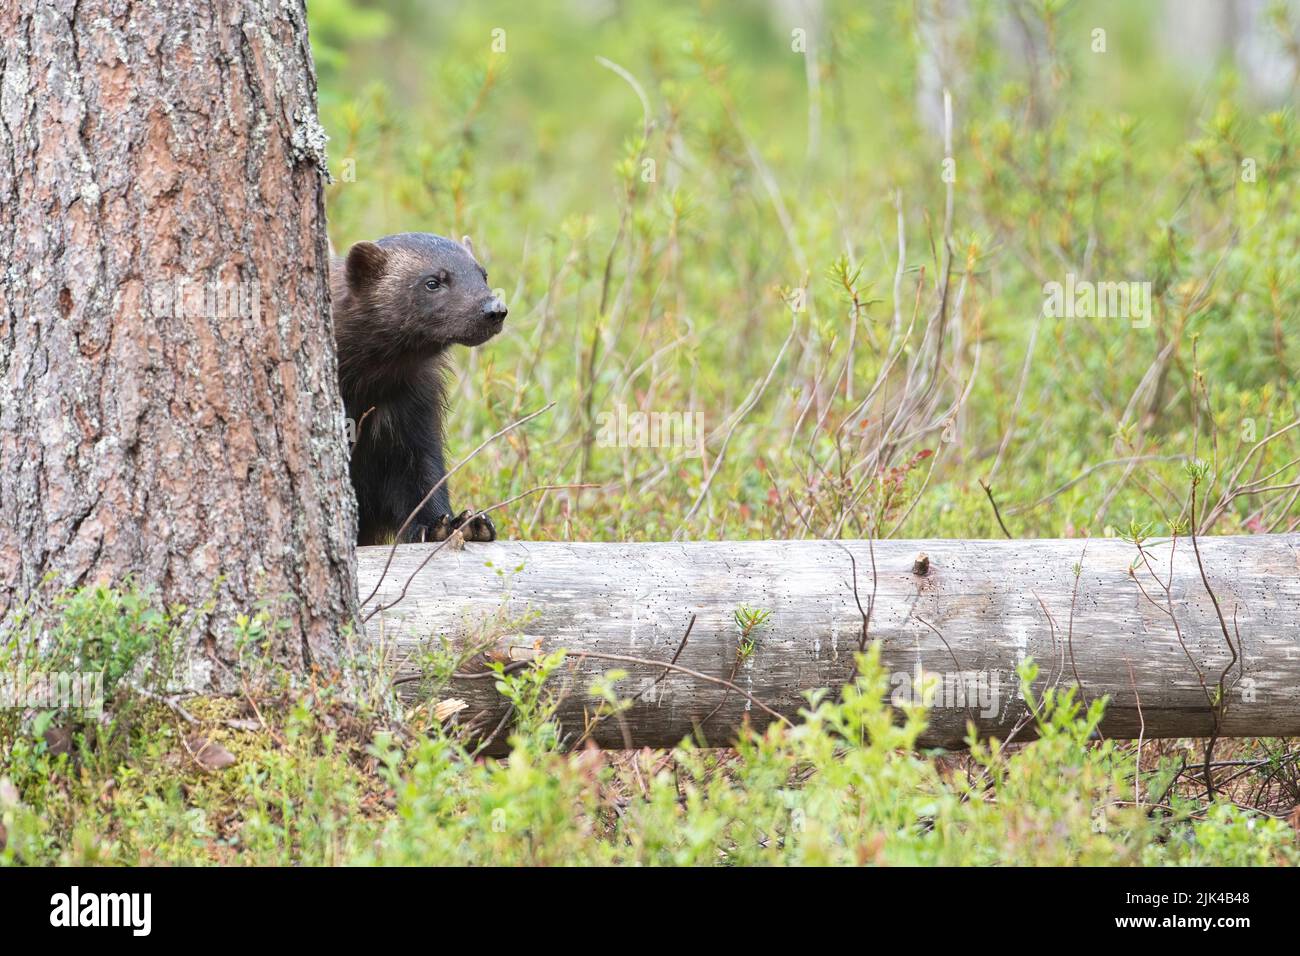 Wolverine (Gulo gulo) photographed in the taiga forest of Finland. Peering from behind a tree trunk, which offers some concealment Stock Photo